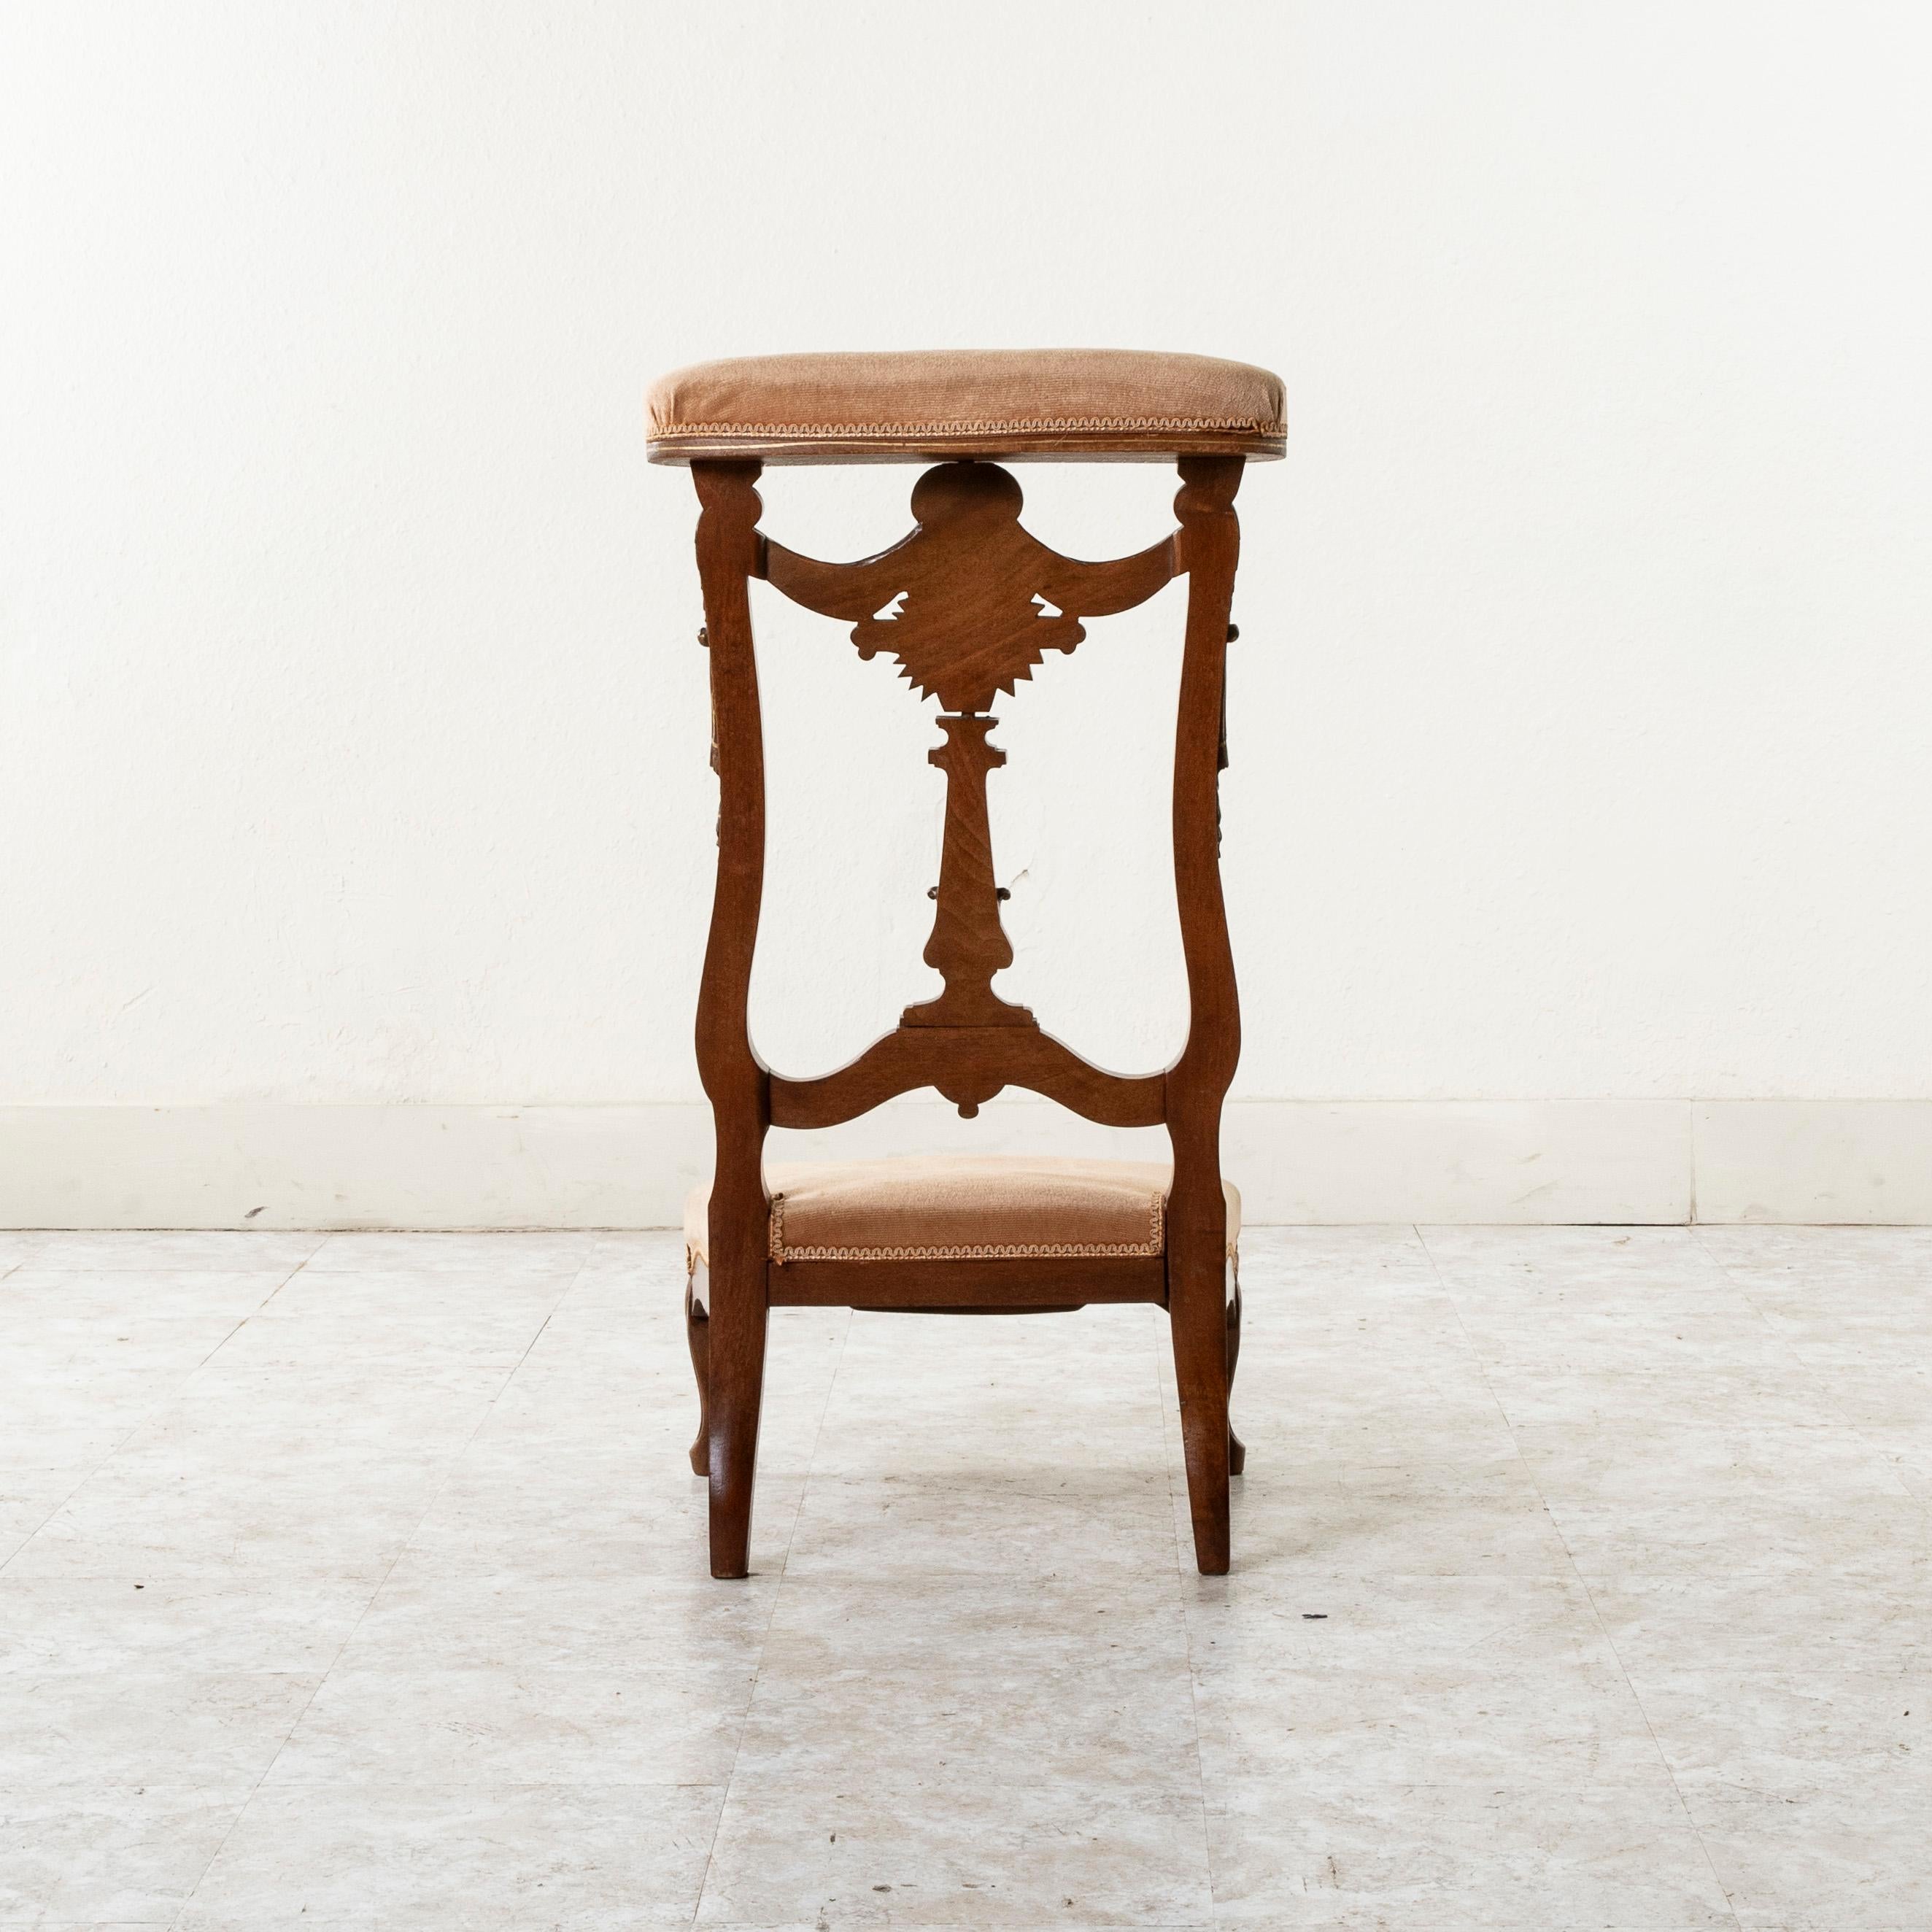 Mid-19th Century French Hand-Carved Walnut Prie Dieu or Prayer Chair For Sale 1